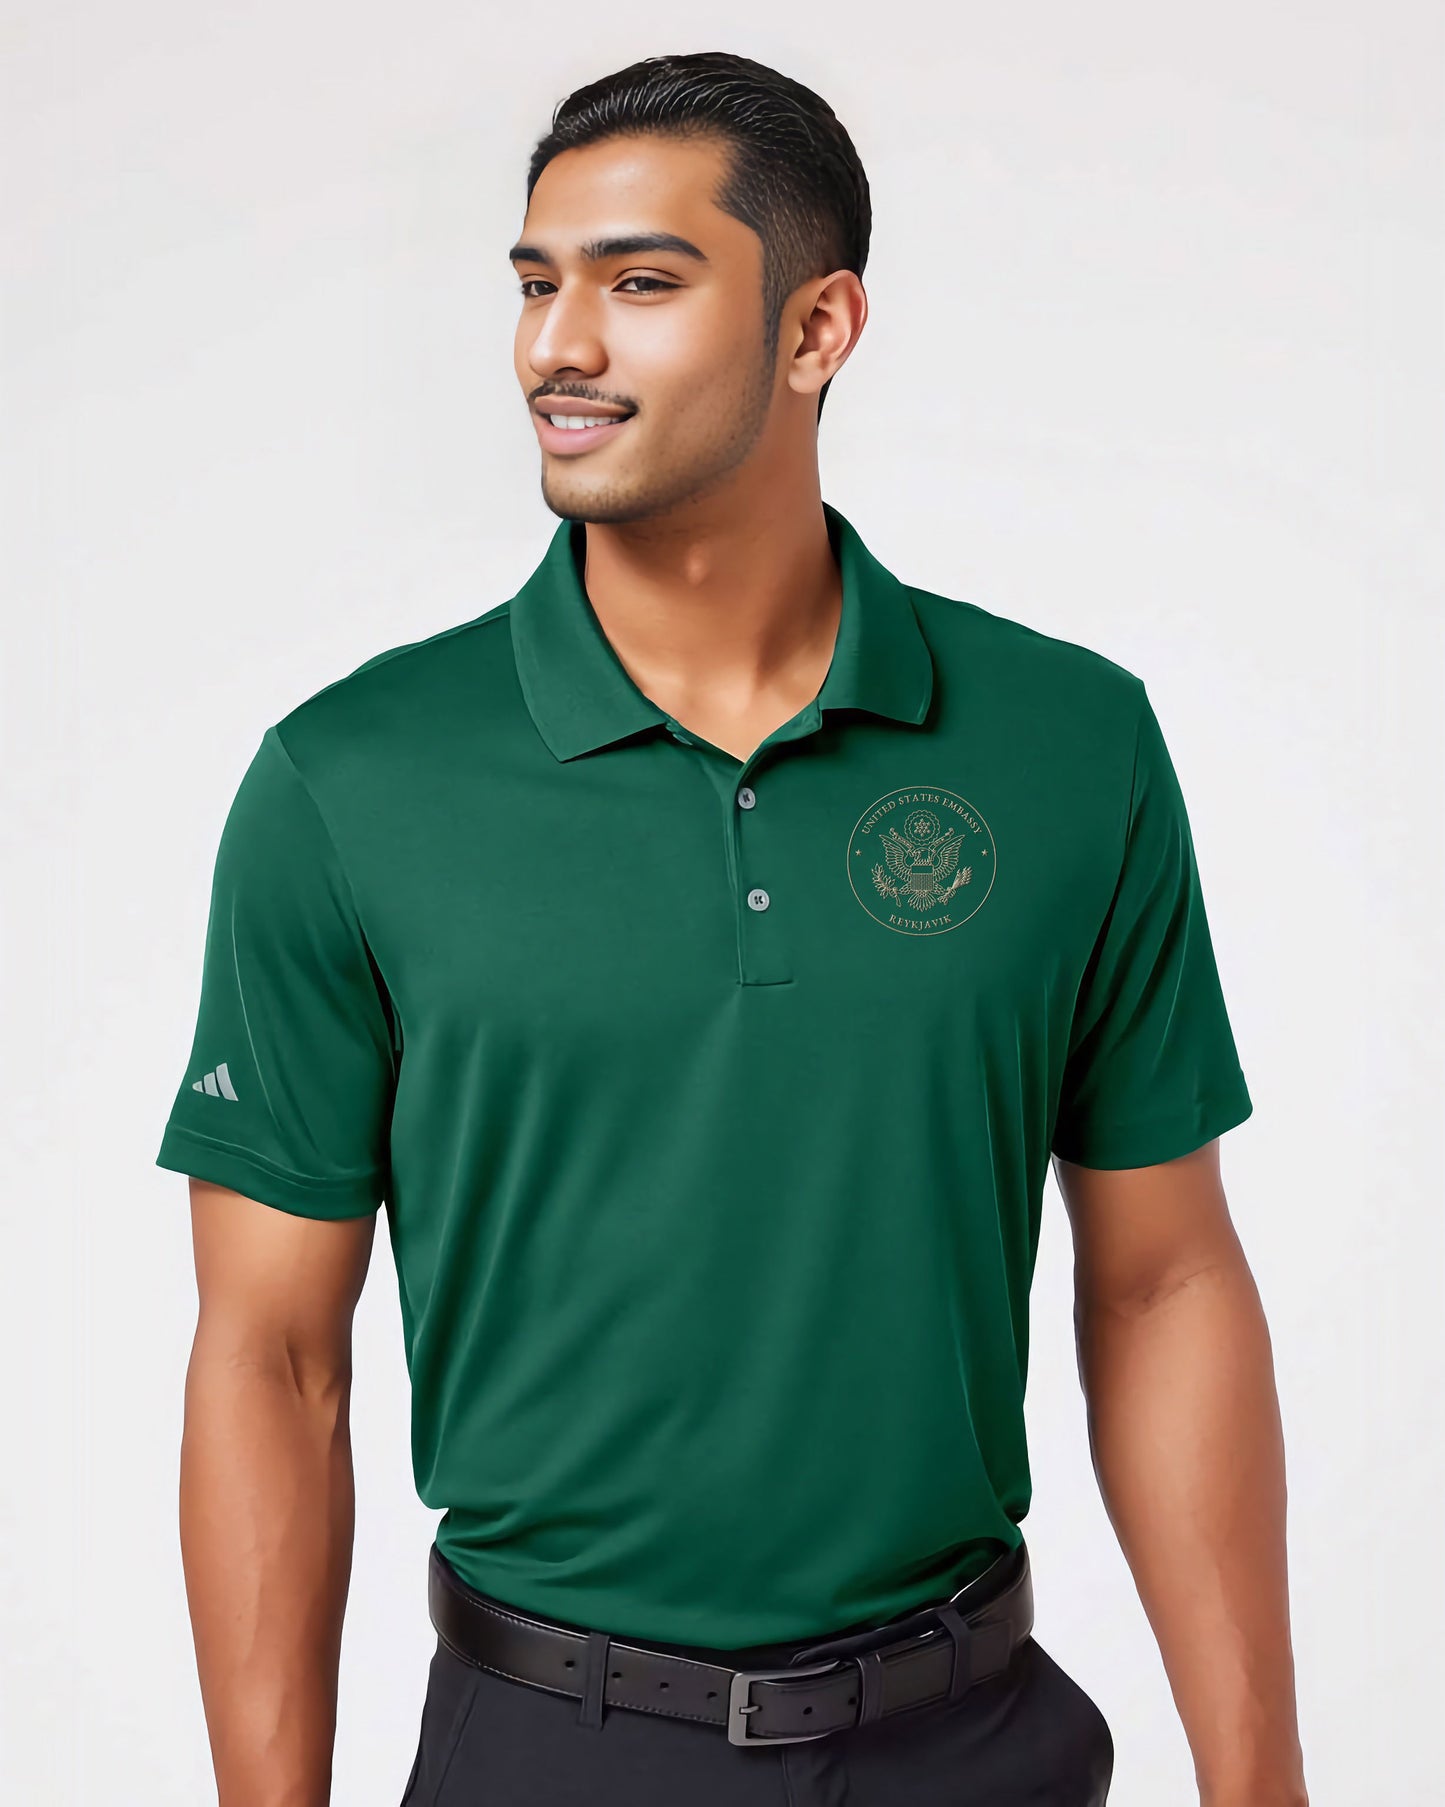 Adidas® Embroidered Polo, Gold Seal: Reykjavik